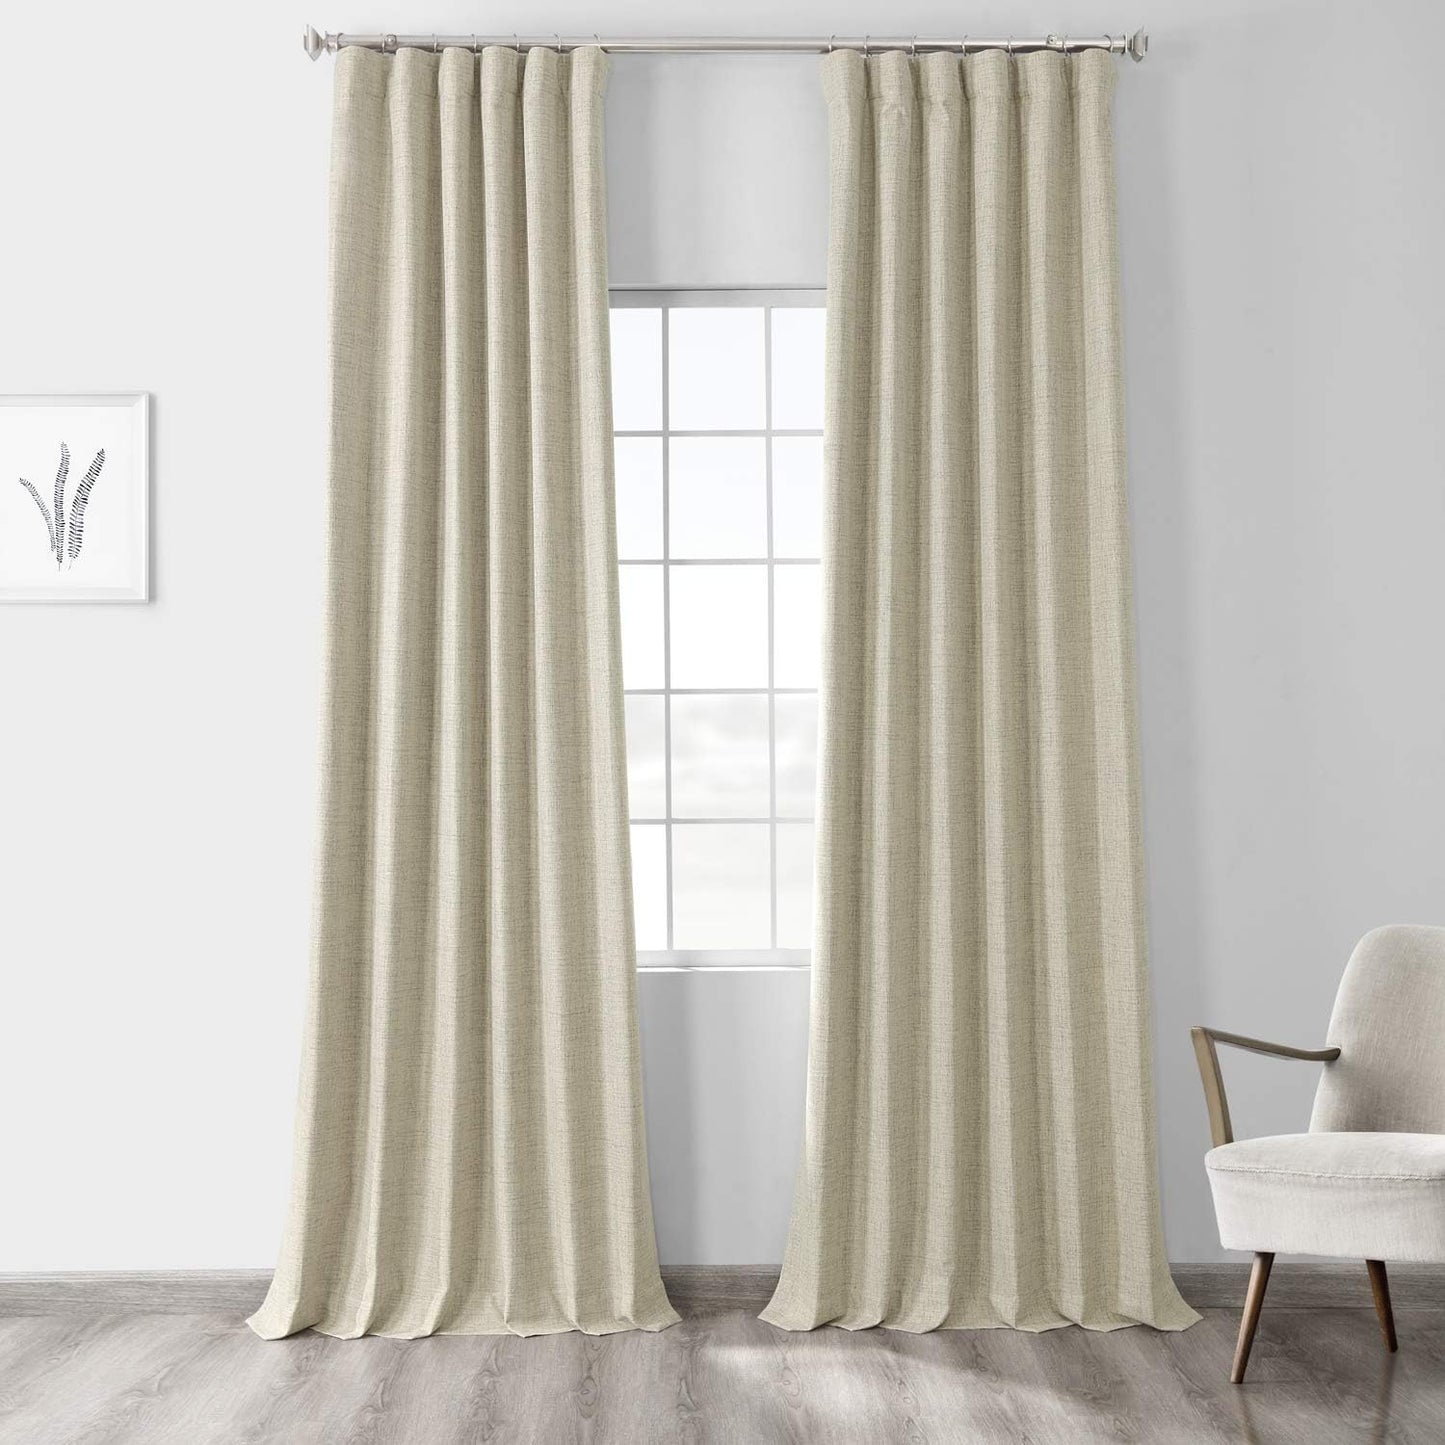 HPD Half Price Drapes Vintage Blackout Curtains for Bedroom - 96 Inches Long Thermal Cross Linen Weave Full Light Blocking 1 Panel Blackout Curtain, (50W X 96L), Millennial Grey  Exclusive Fabrics & Furnishings Toasted Tan 50W X 108L 